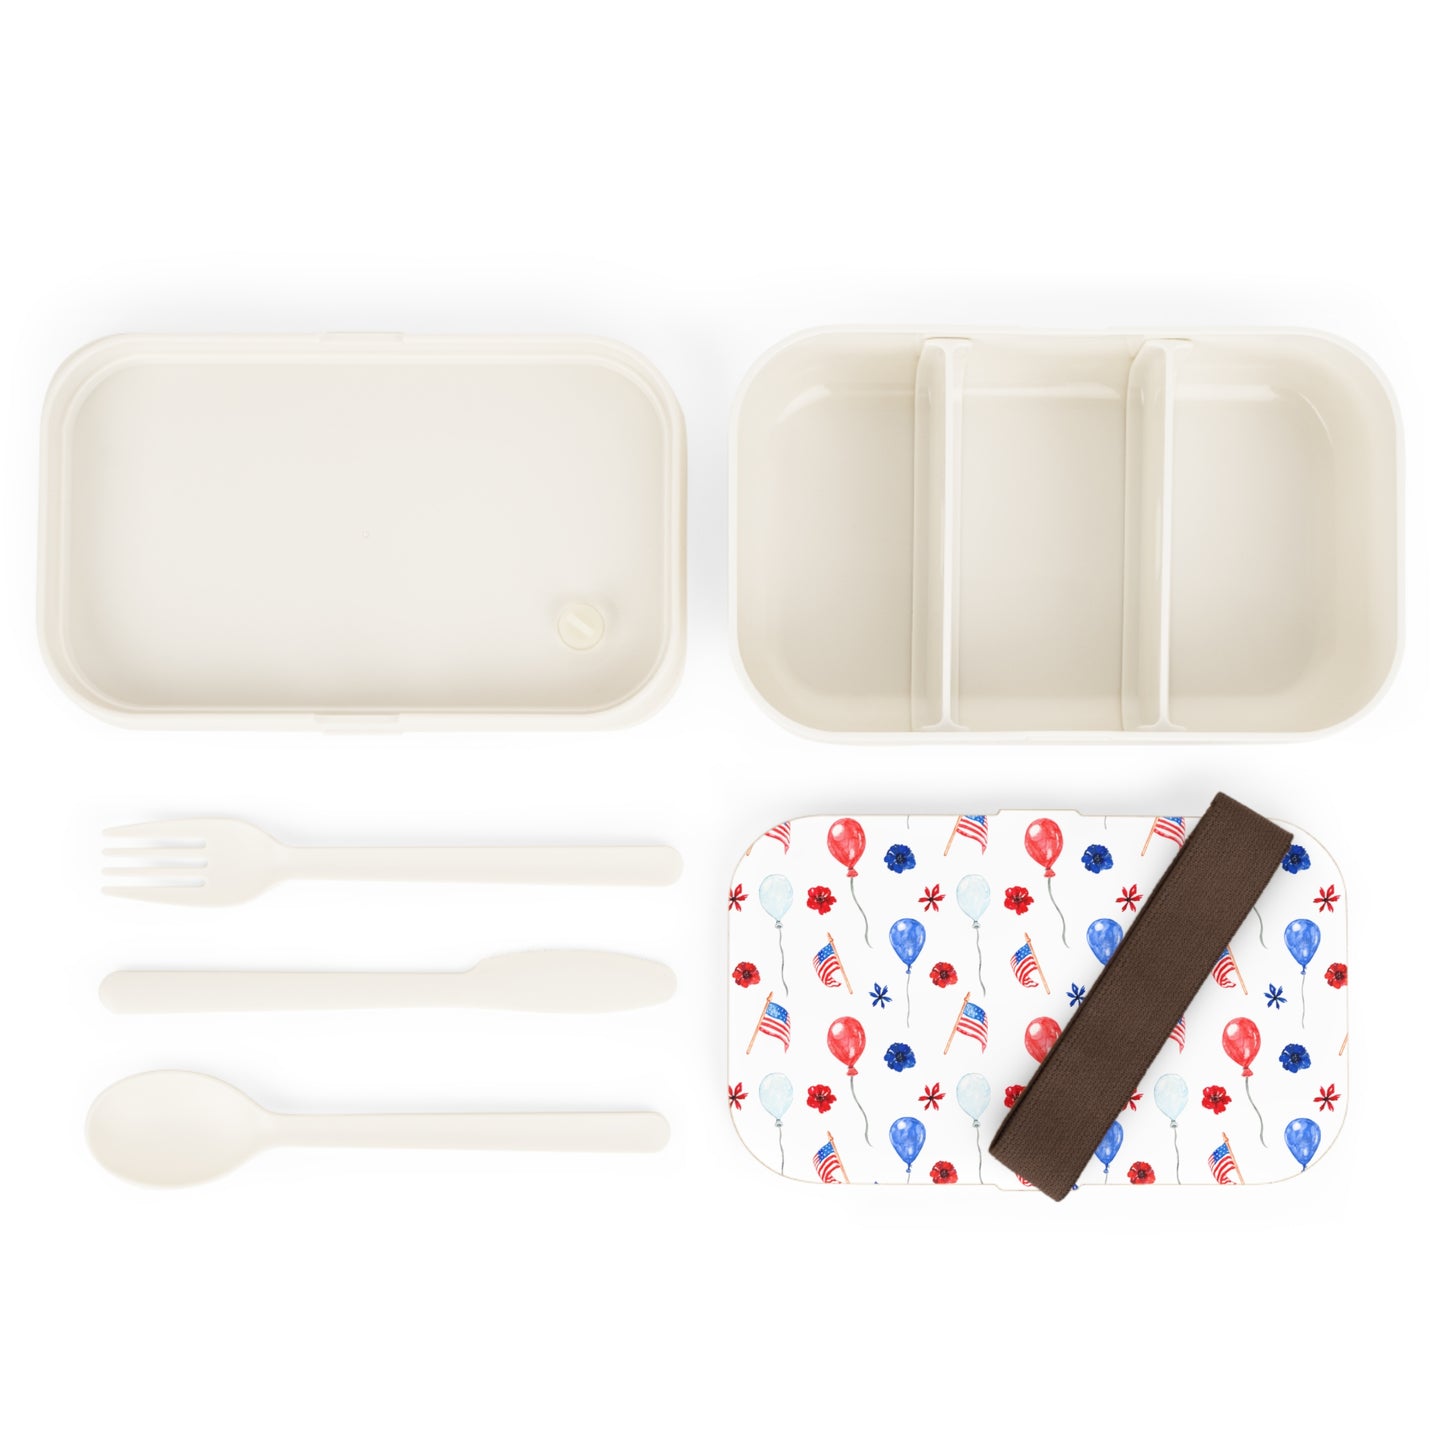 American Flags and Balloons Bento Lunch Box